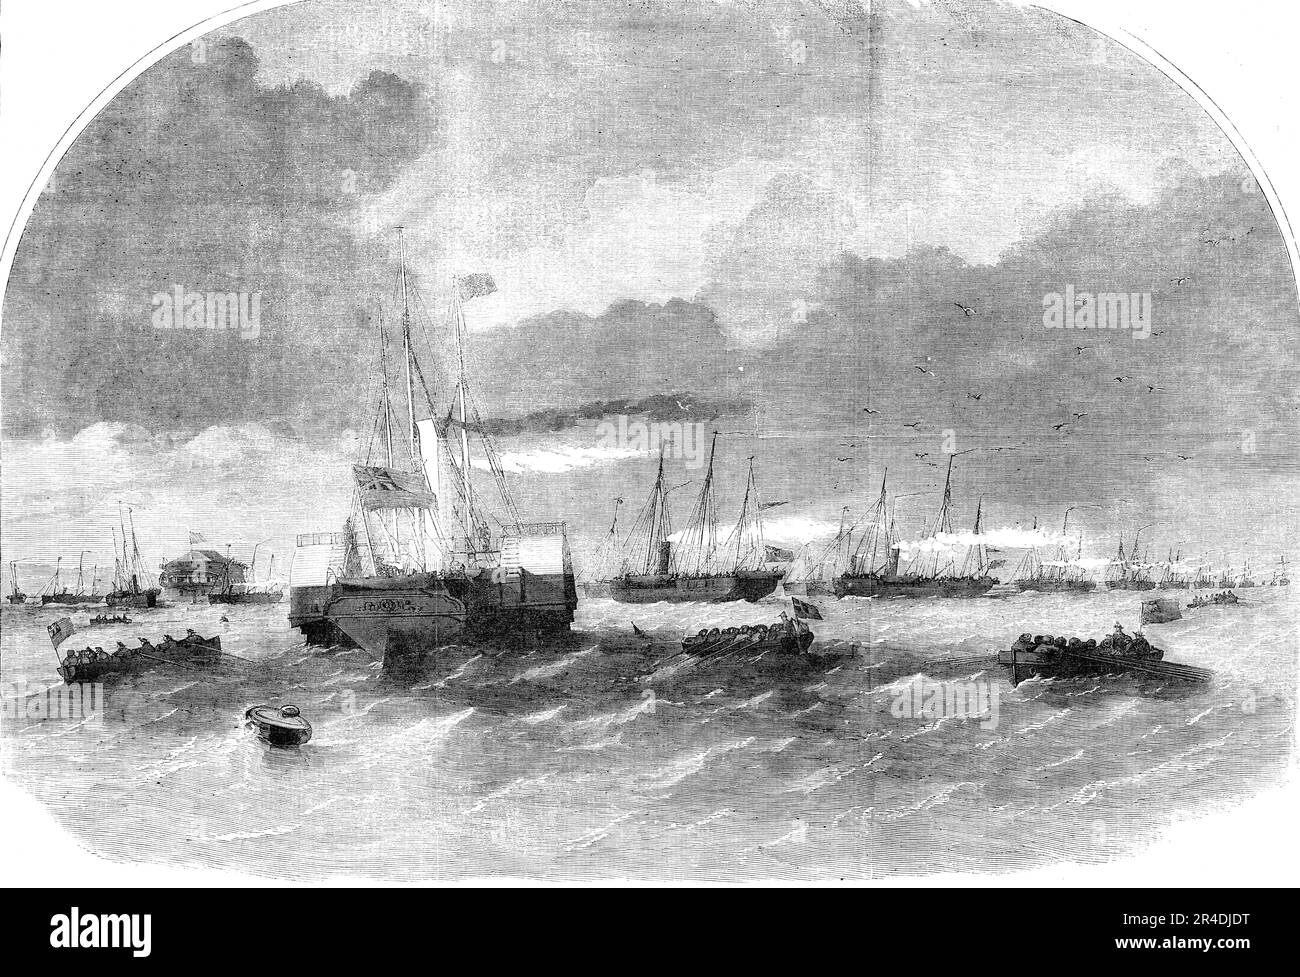 The Gun-Boat Flotilla, off Ryde, Isle of Wight, 1856. '...the first division of the numerous fleet of gun-boats intended for the next Baltic campaign. It consisted of the following vessels, each carrying two 68-pounder guns and two howitzers, under the orders of Captain Codrington, viz.: Starling, Biter, Dapper, Stork, Charger, Skylark, Snapper, Beaver, Swinger, Jackdaw, Dove, Banterer, Bustard, Bullfrog , Cockchafer; attended by the Commander of Portsmouth Dockyard, Vice-Admiral Sir G T. Seymour, K.C.B. , in the Fire Queen...the little fleet has been daily augmented by fresh arrivals from dif Stock Photo